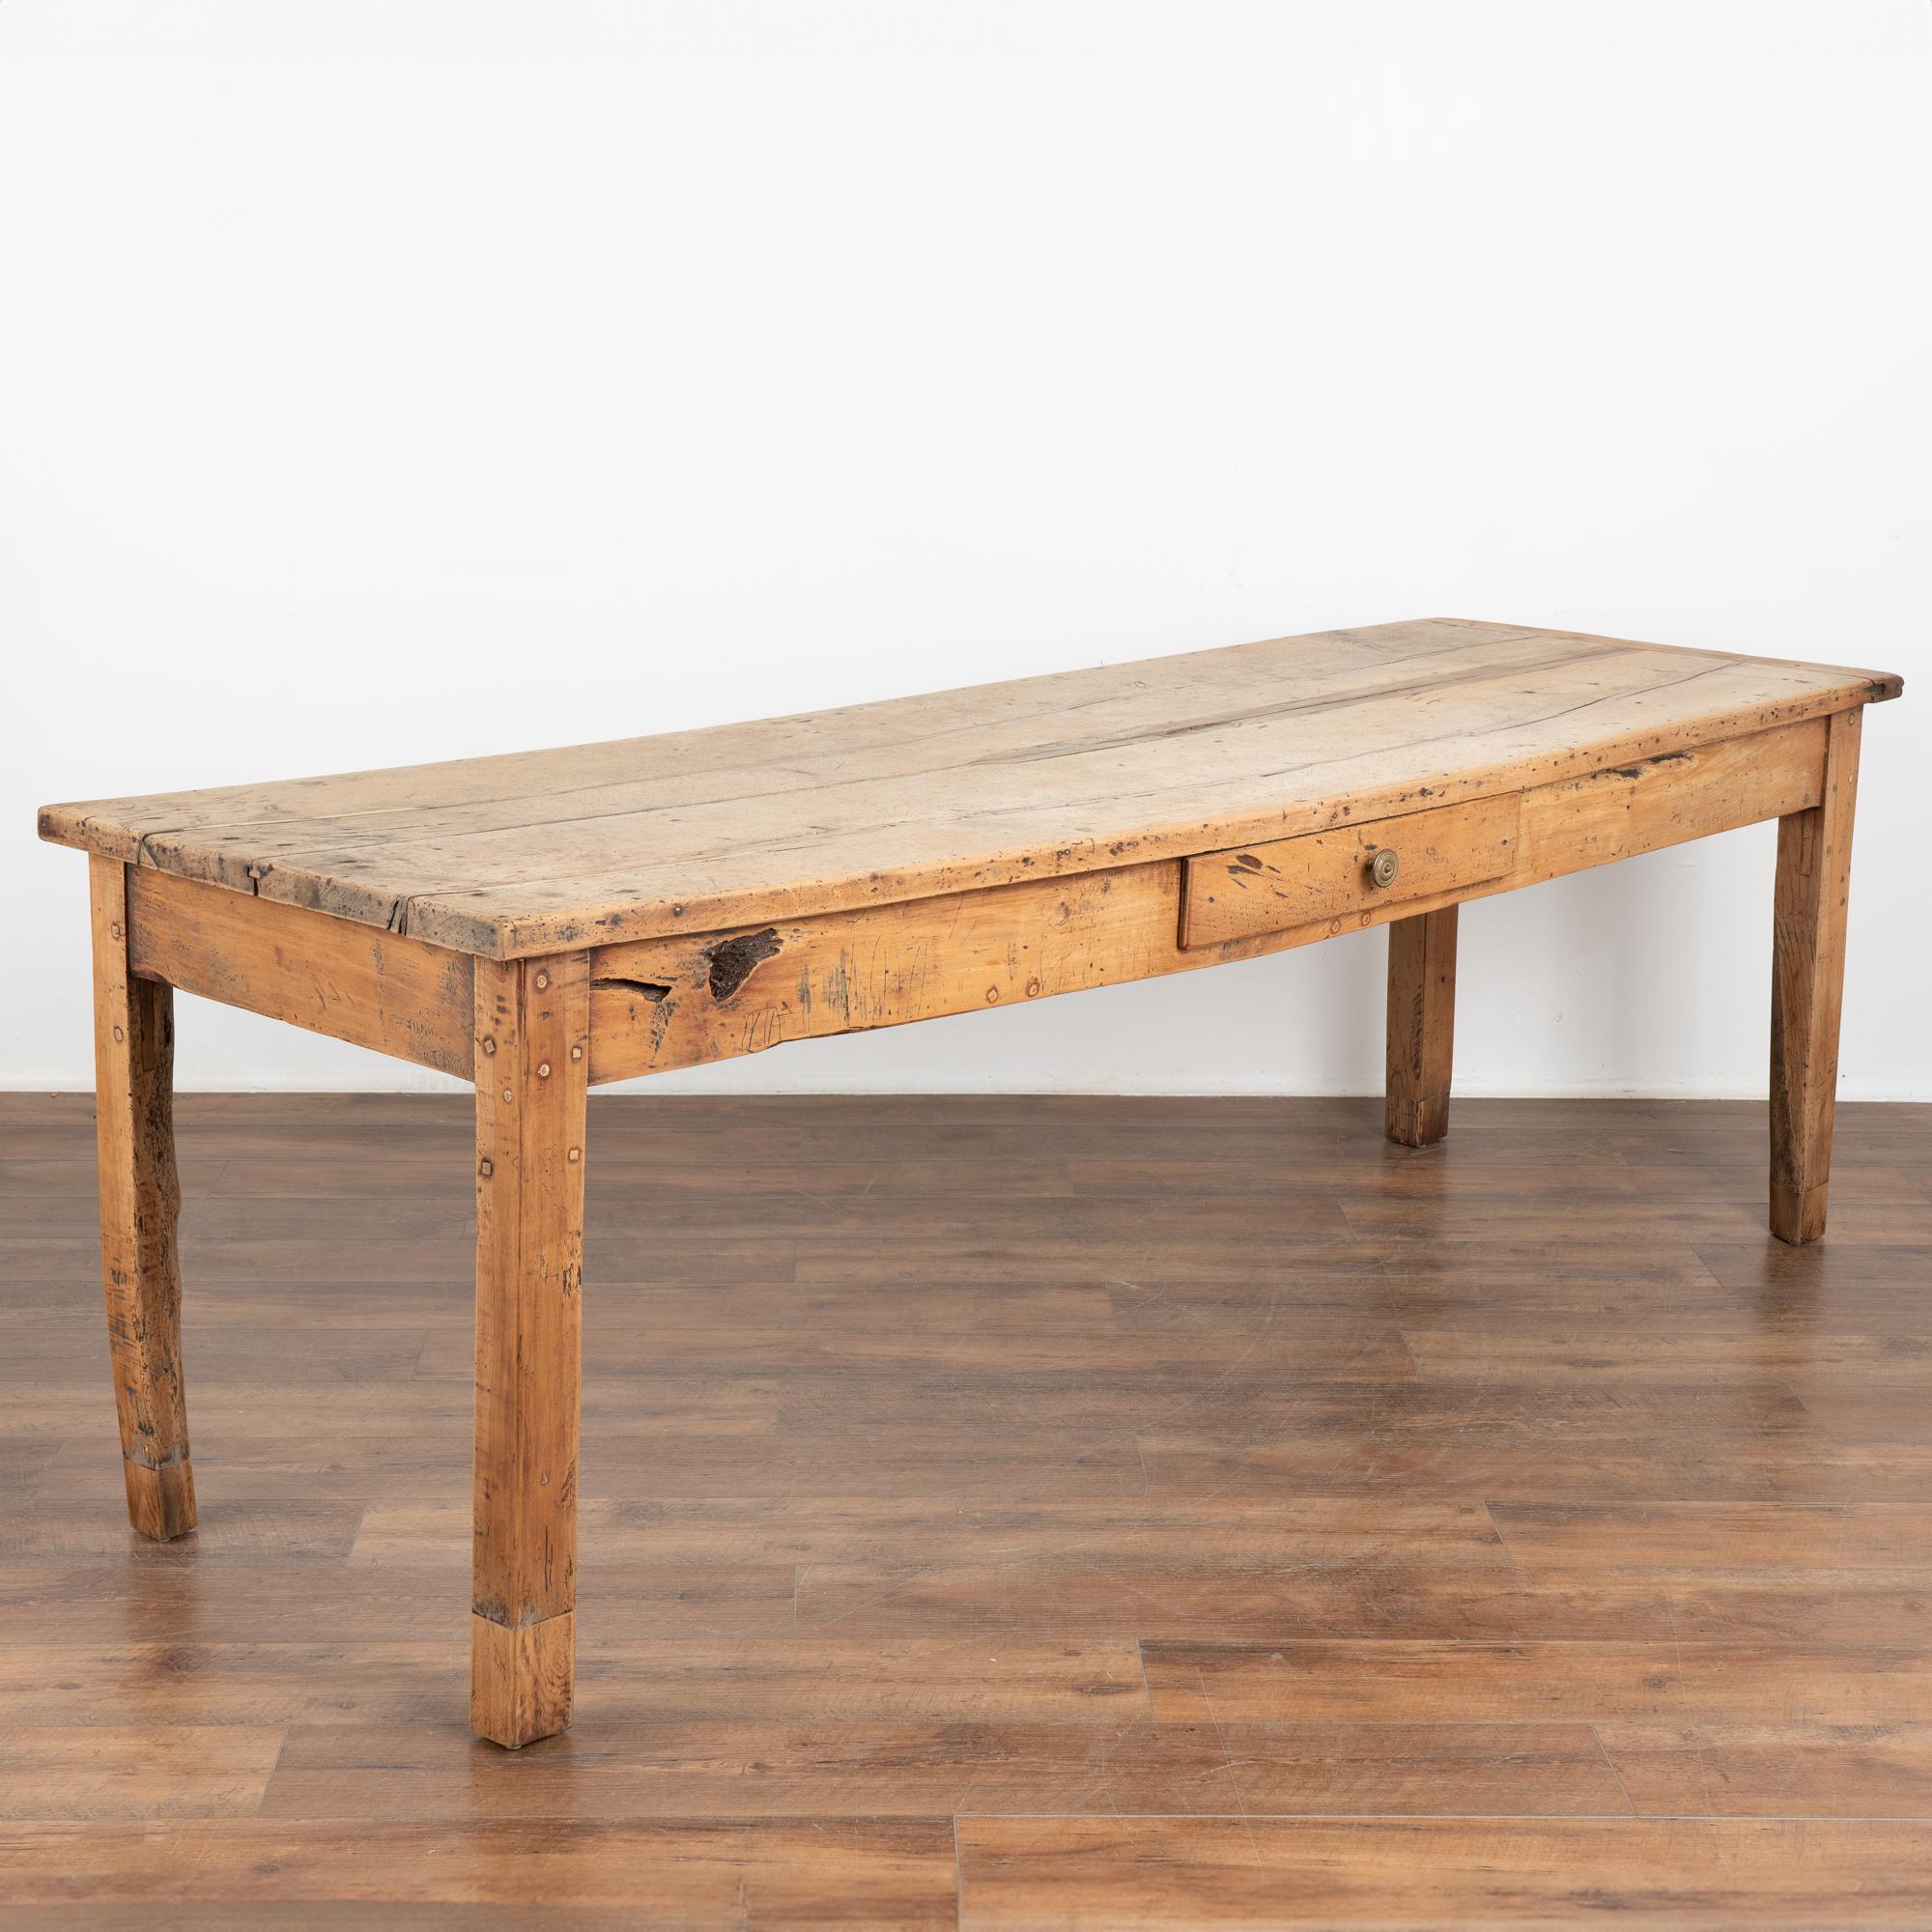 The beauty of this old farm table comes from the the generations of use seen in every nick, crack, old repair, knot hole and more which all adding to its the worn appeal.
A single drawer is located on each side of the table (one in center, one set